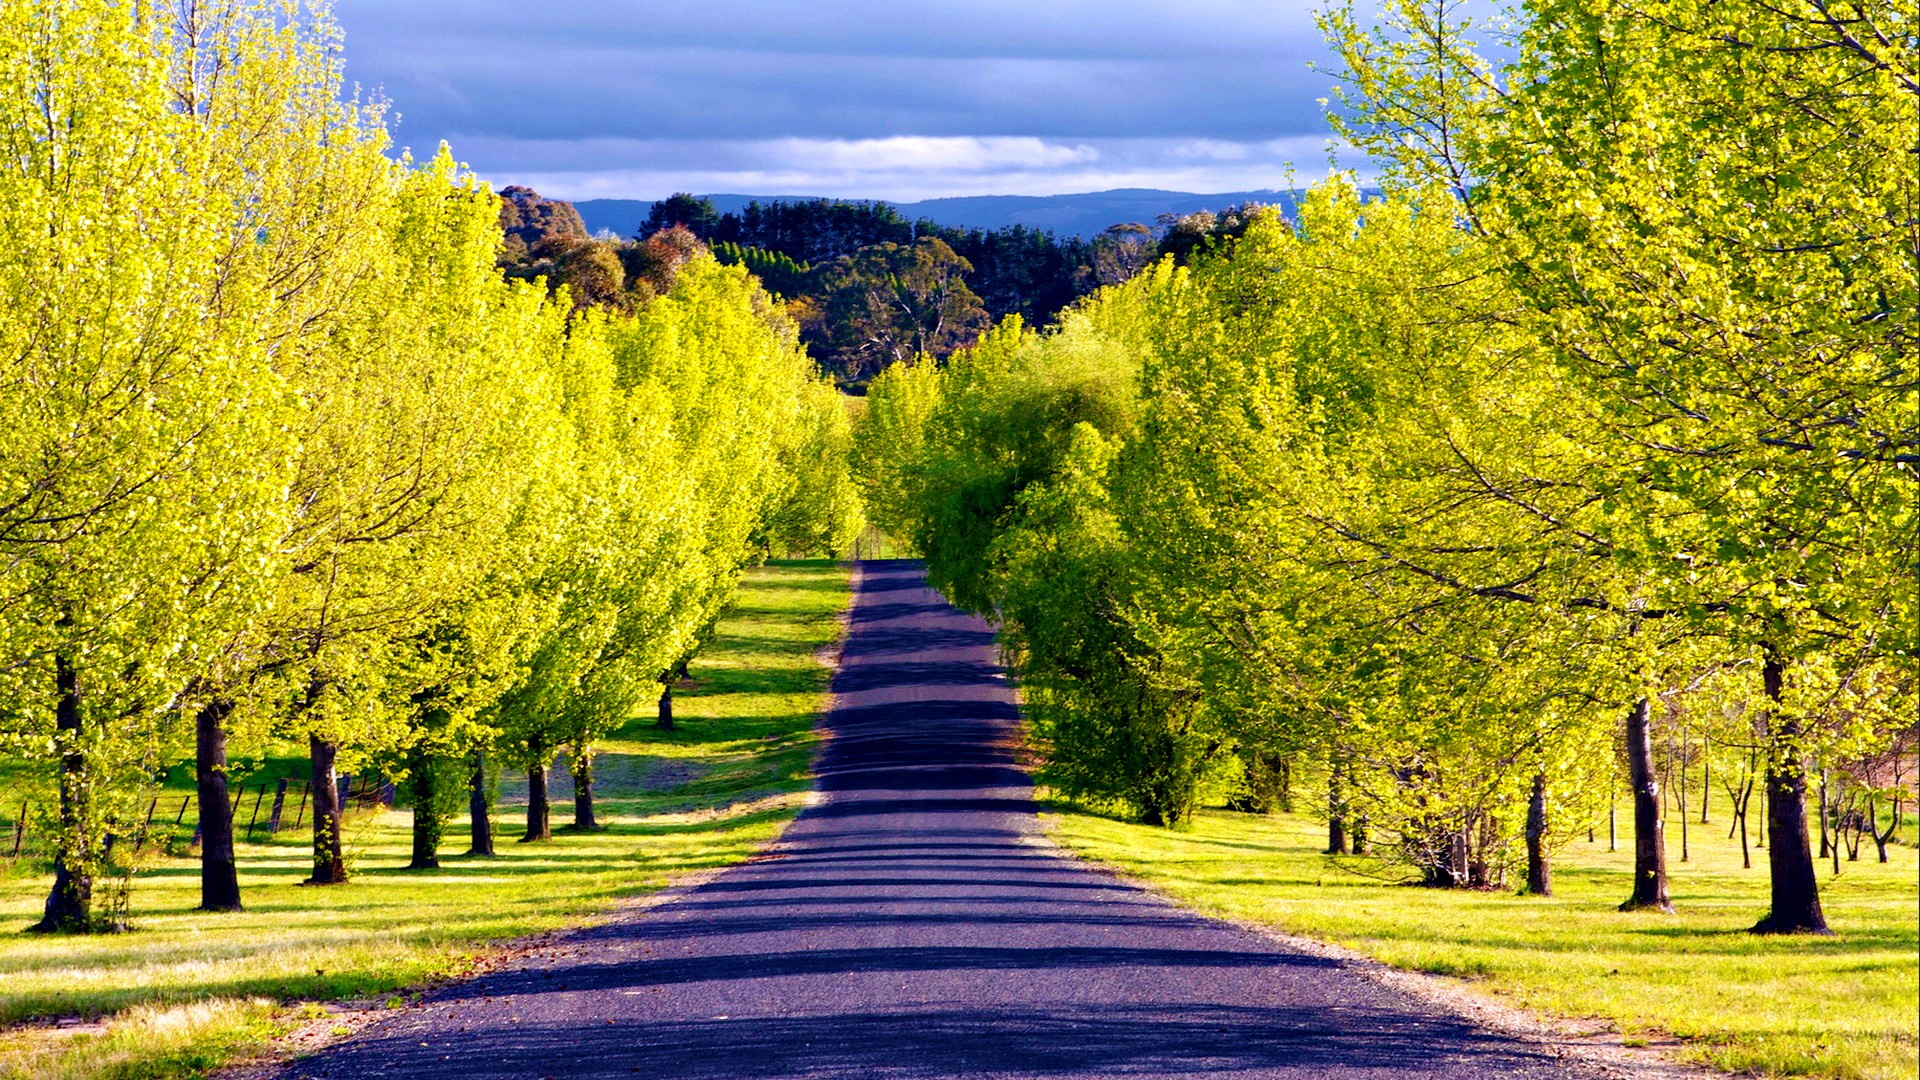 Mountain Road Lined By Green Trees HD Wallpaper Background Image